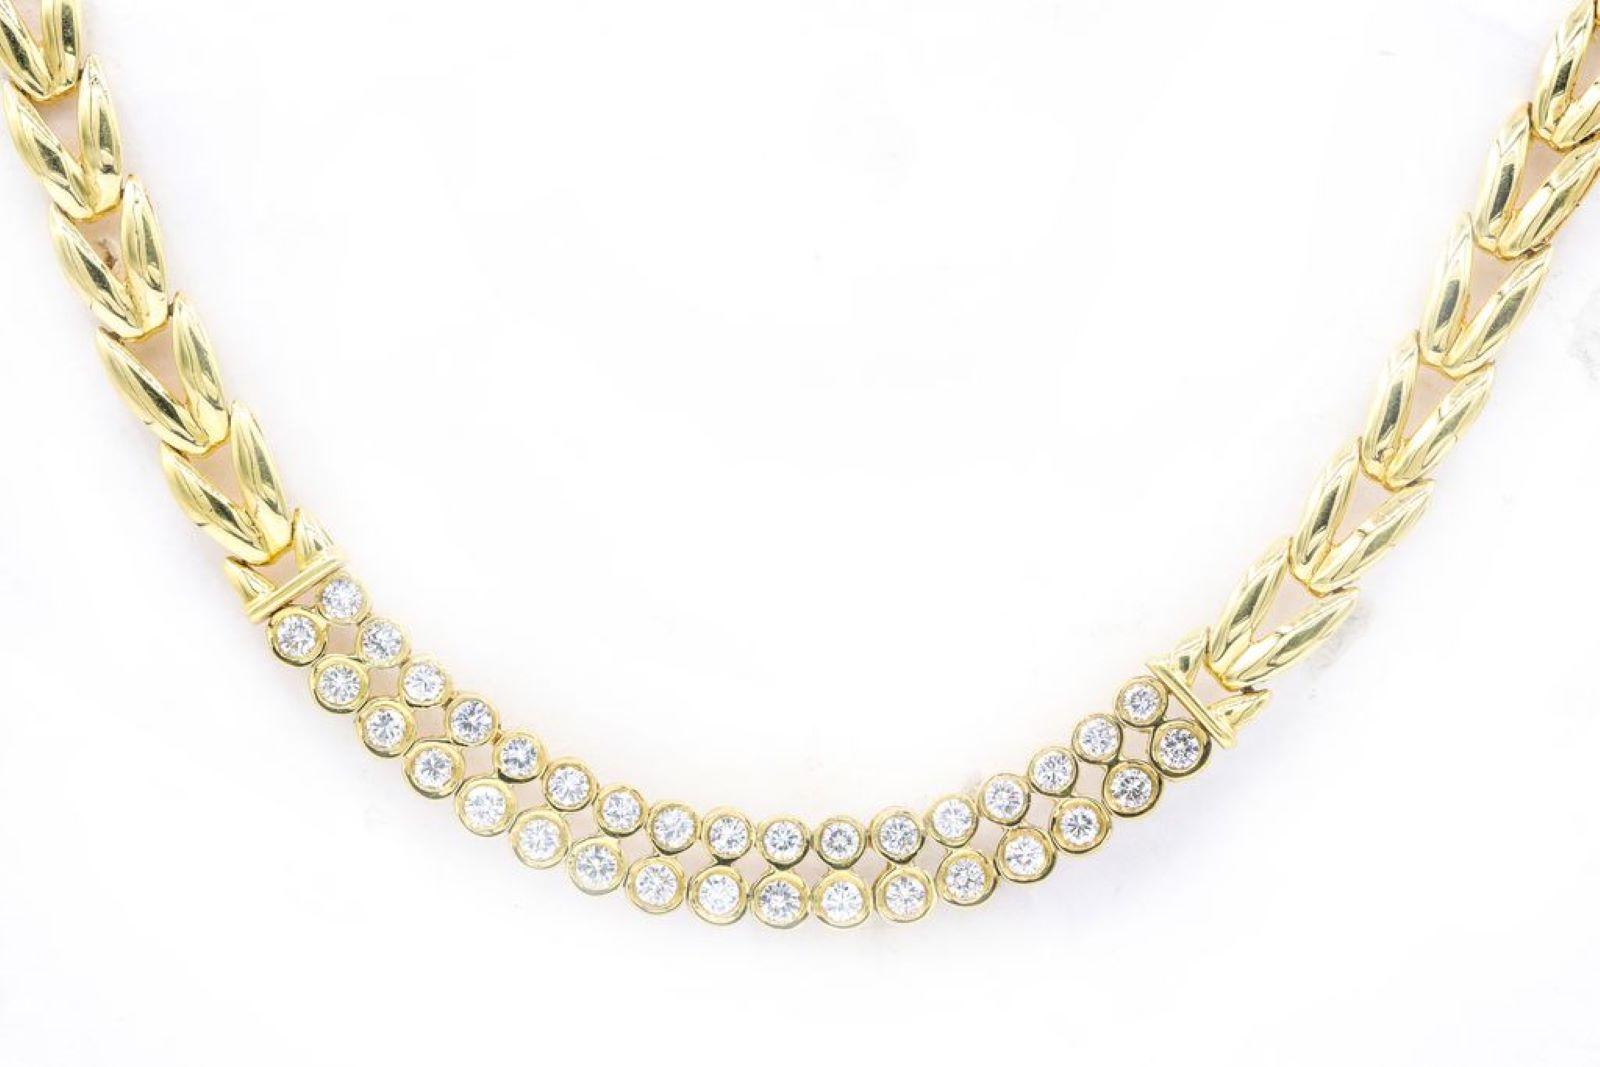 Modern Diana M 2.05cts Diamond Choker Necklace in 14kt Yellow Gold For Sale